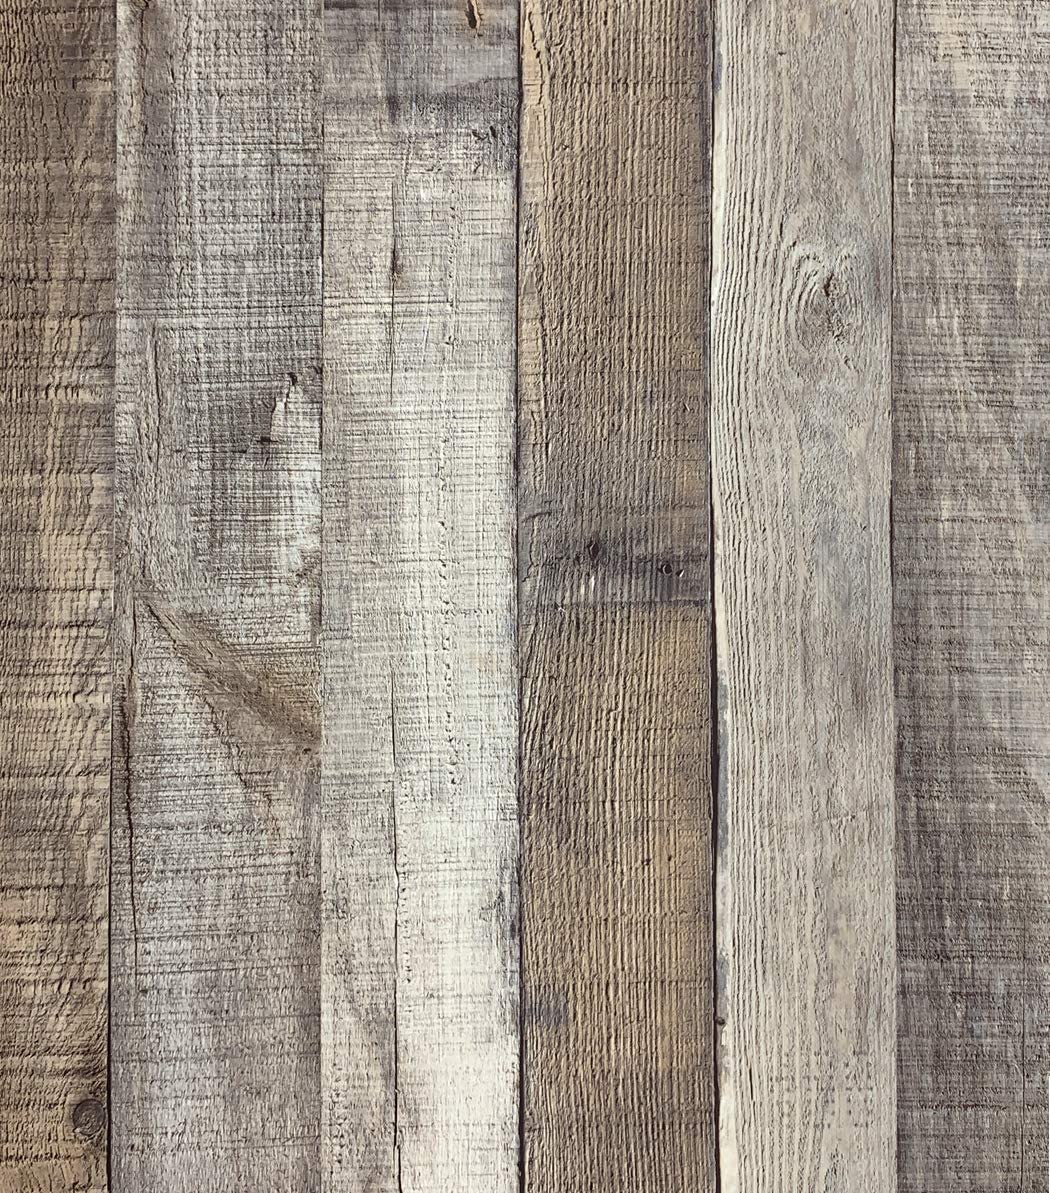 Vintage Wood Wallpaper Rustic Wood Wallpaper Stick and Peel 17.71”x 236” Self Adhesive Removable Distressed Wood Look Wallpaper Vinyl Shelf Home Wood Panel Thicker Wall Paper Covering Film